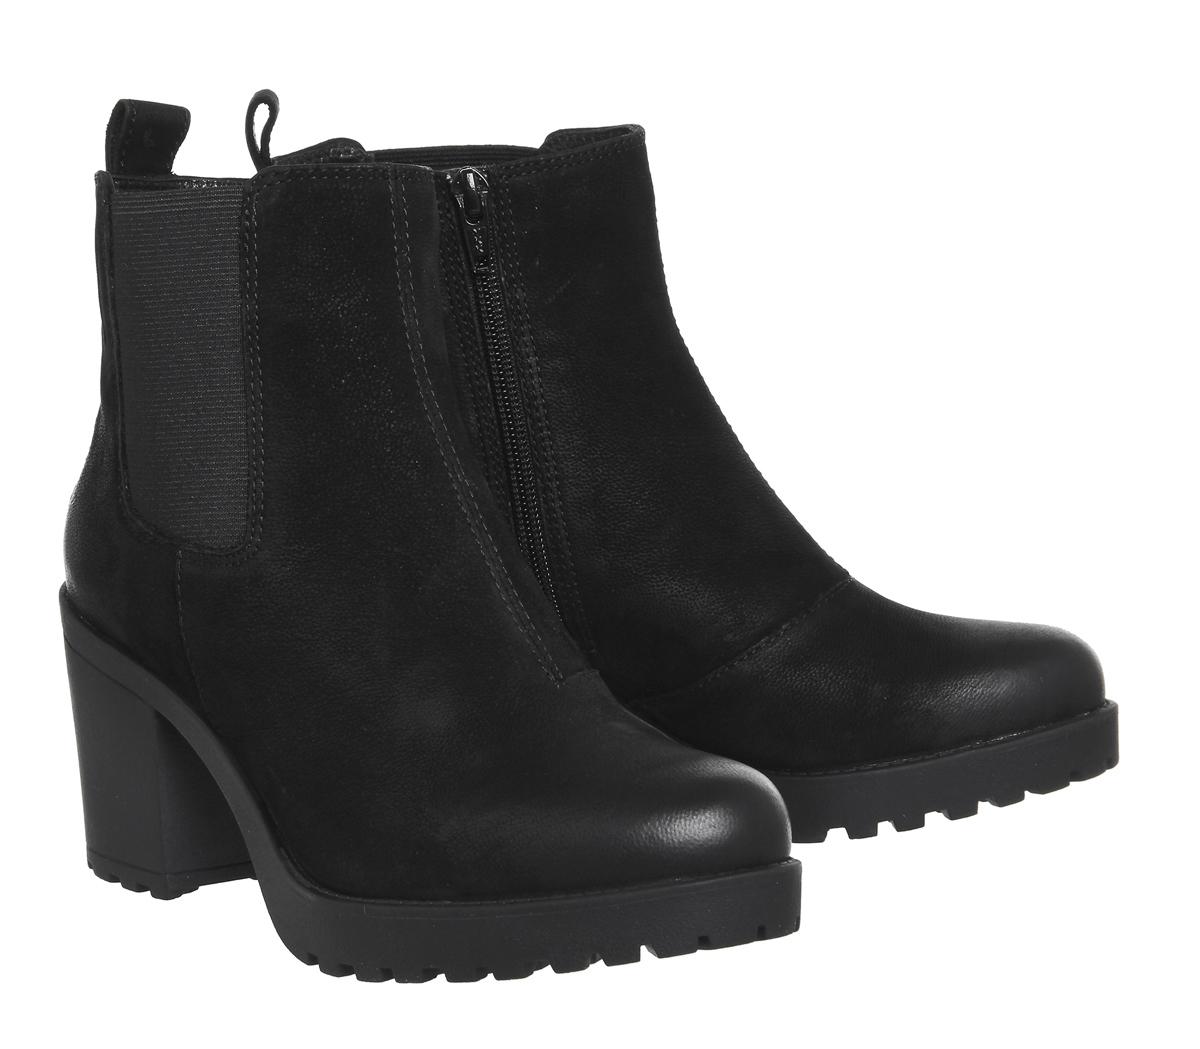 Vagabond Leather Grace Heeled Chelsea Boots in Black - Lyst